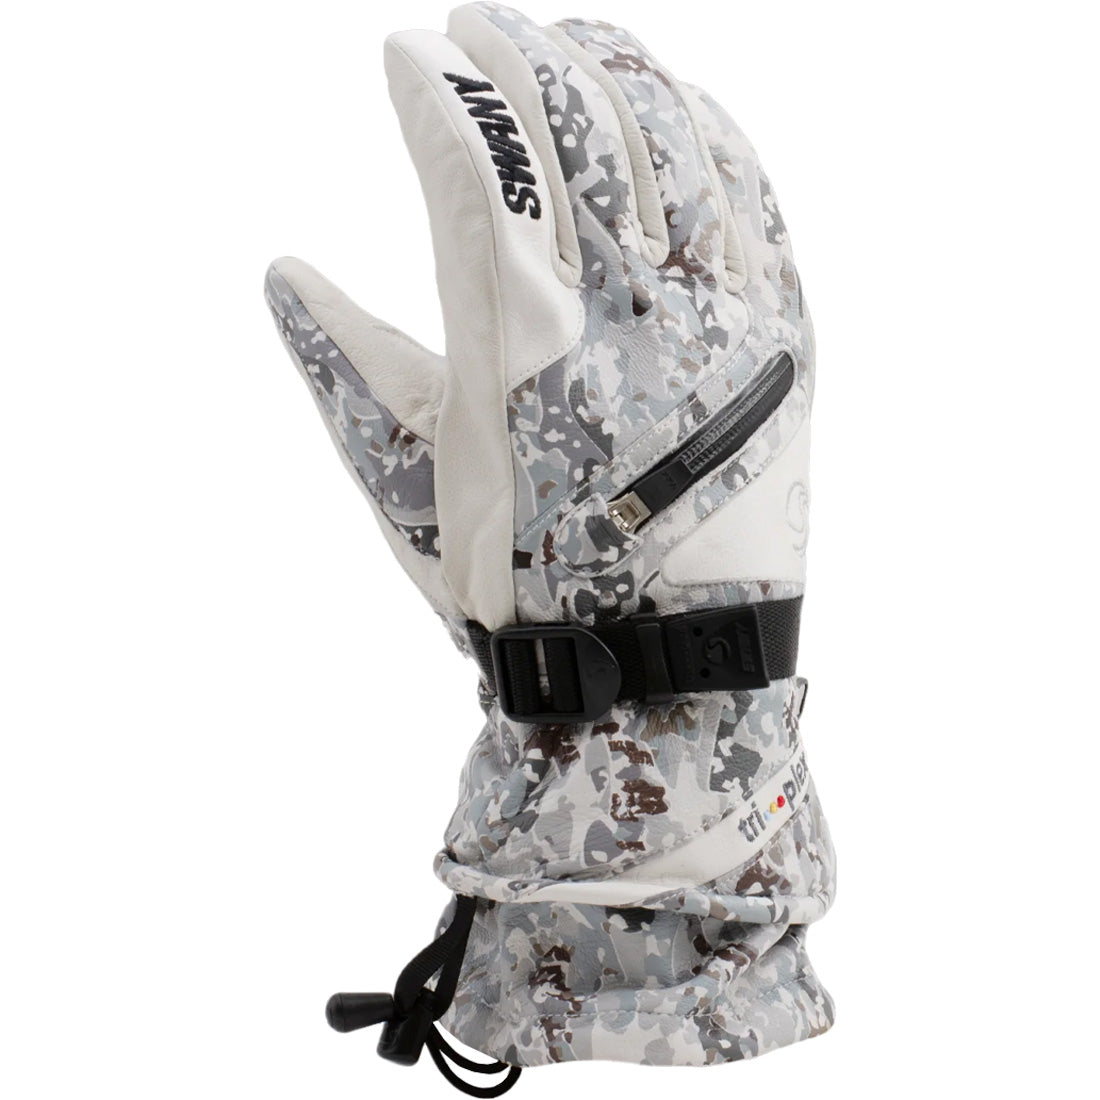 Swany X-Cell Glove 2.1 - Men's